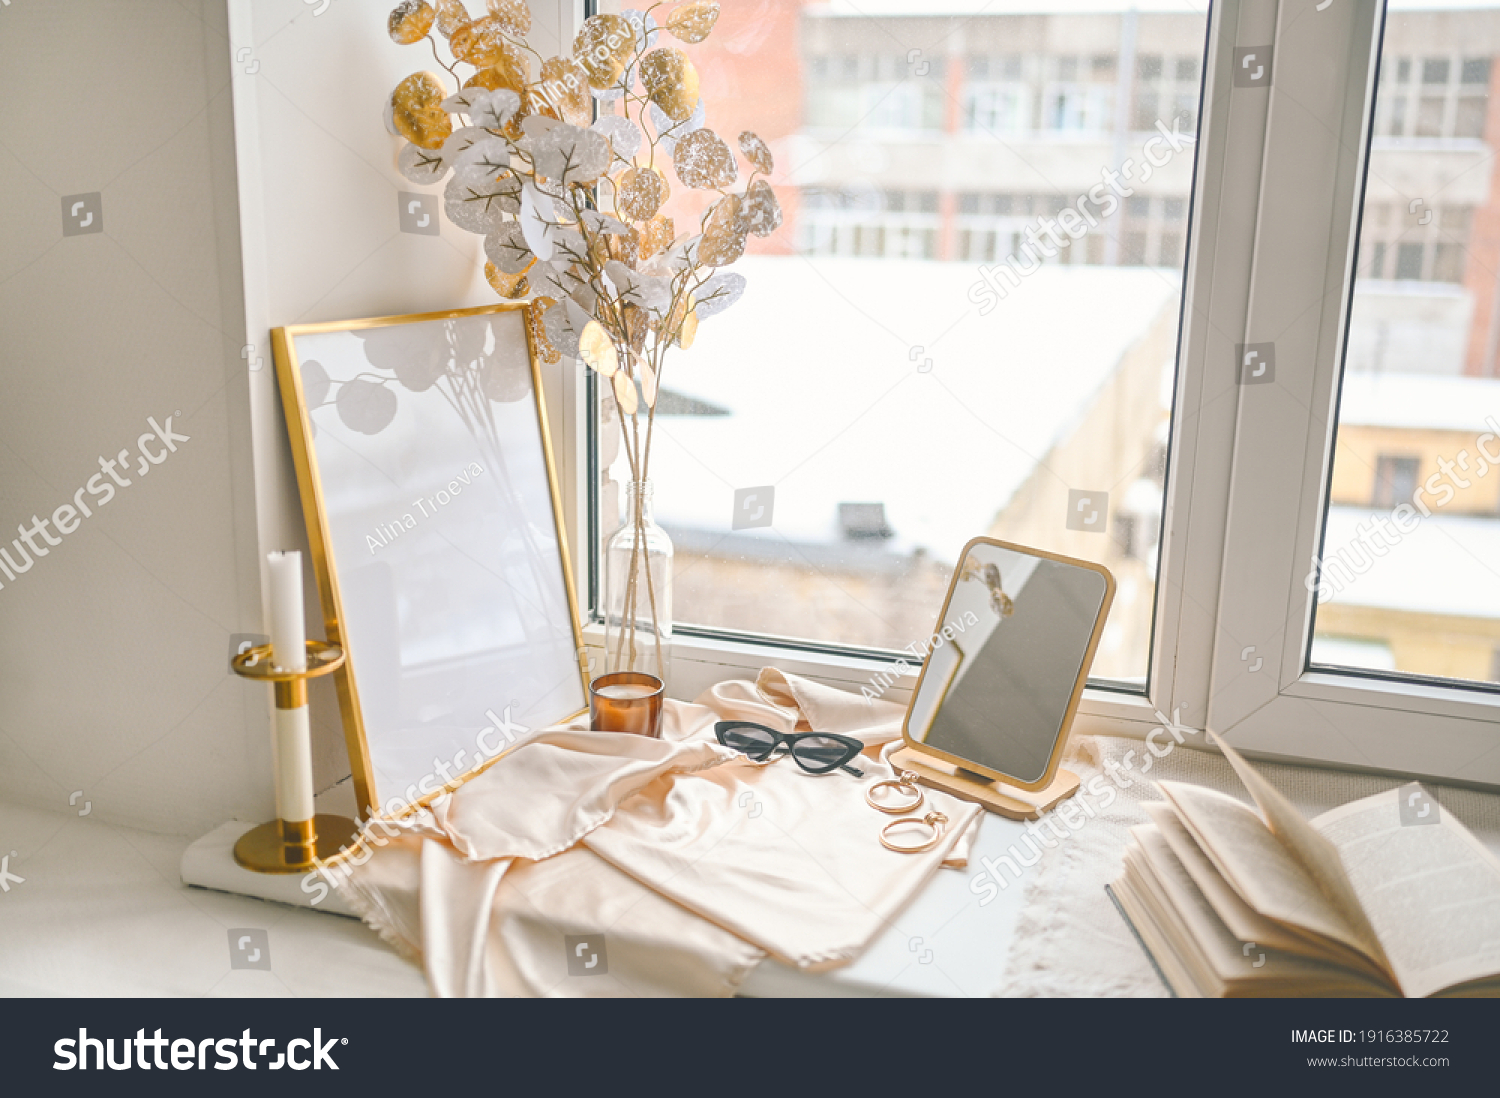 Cozy spring still life feminine scene golden shades. Female styled window sill minimalistic composition. Empty picture mock up poster frame, elegant accessories mirror earrings, dried flowers, candle #1916385722